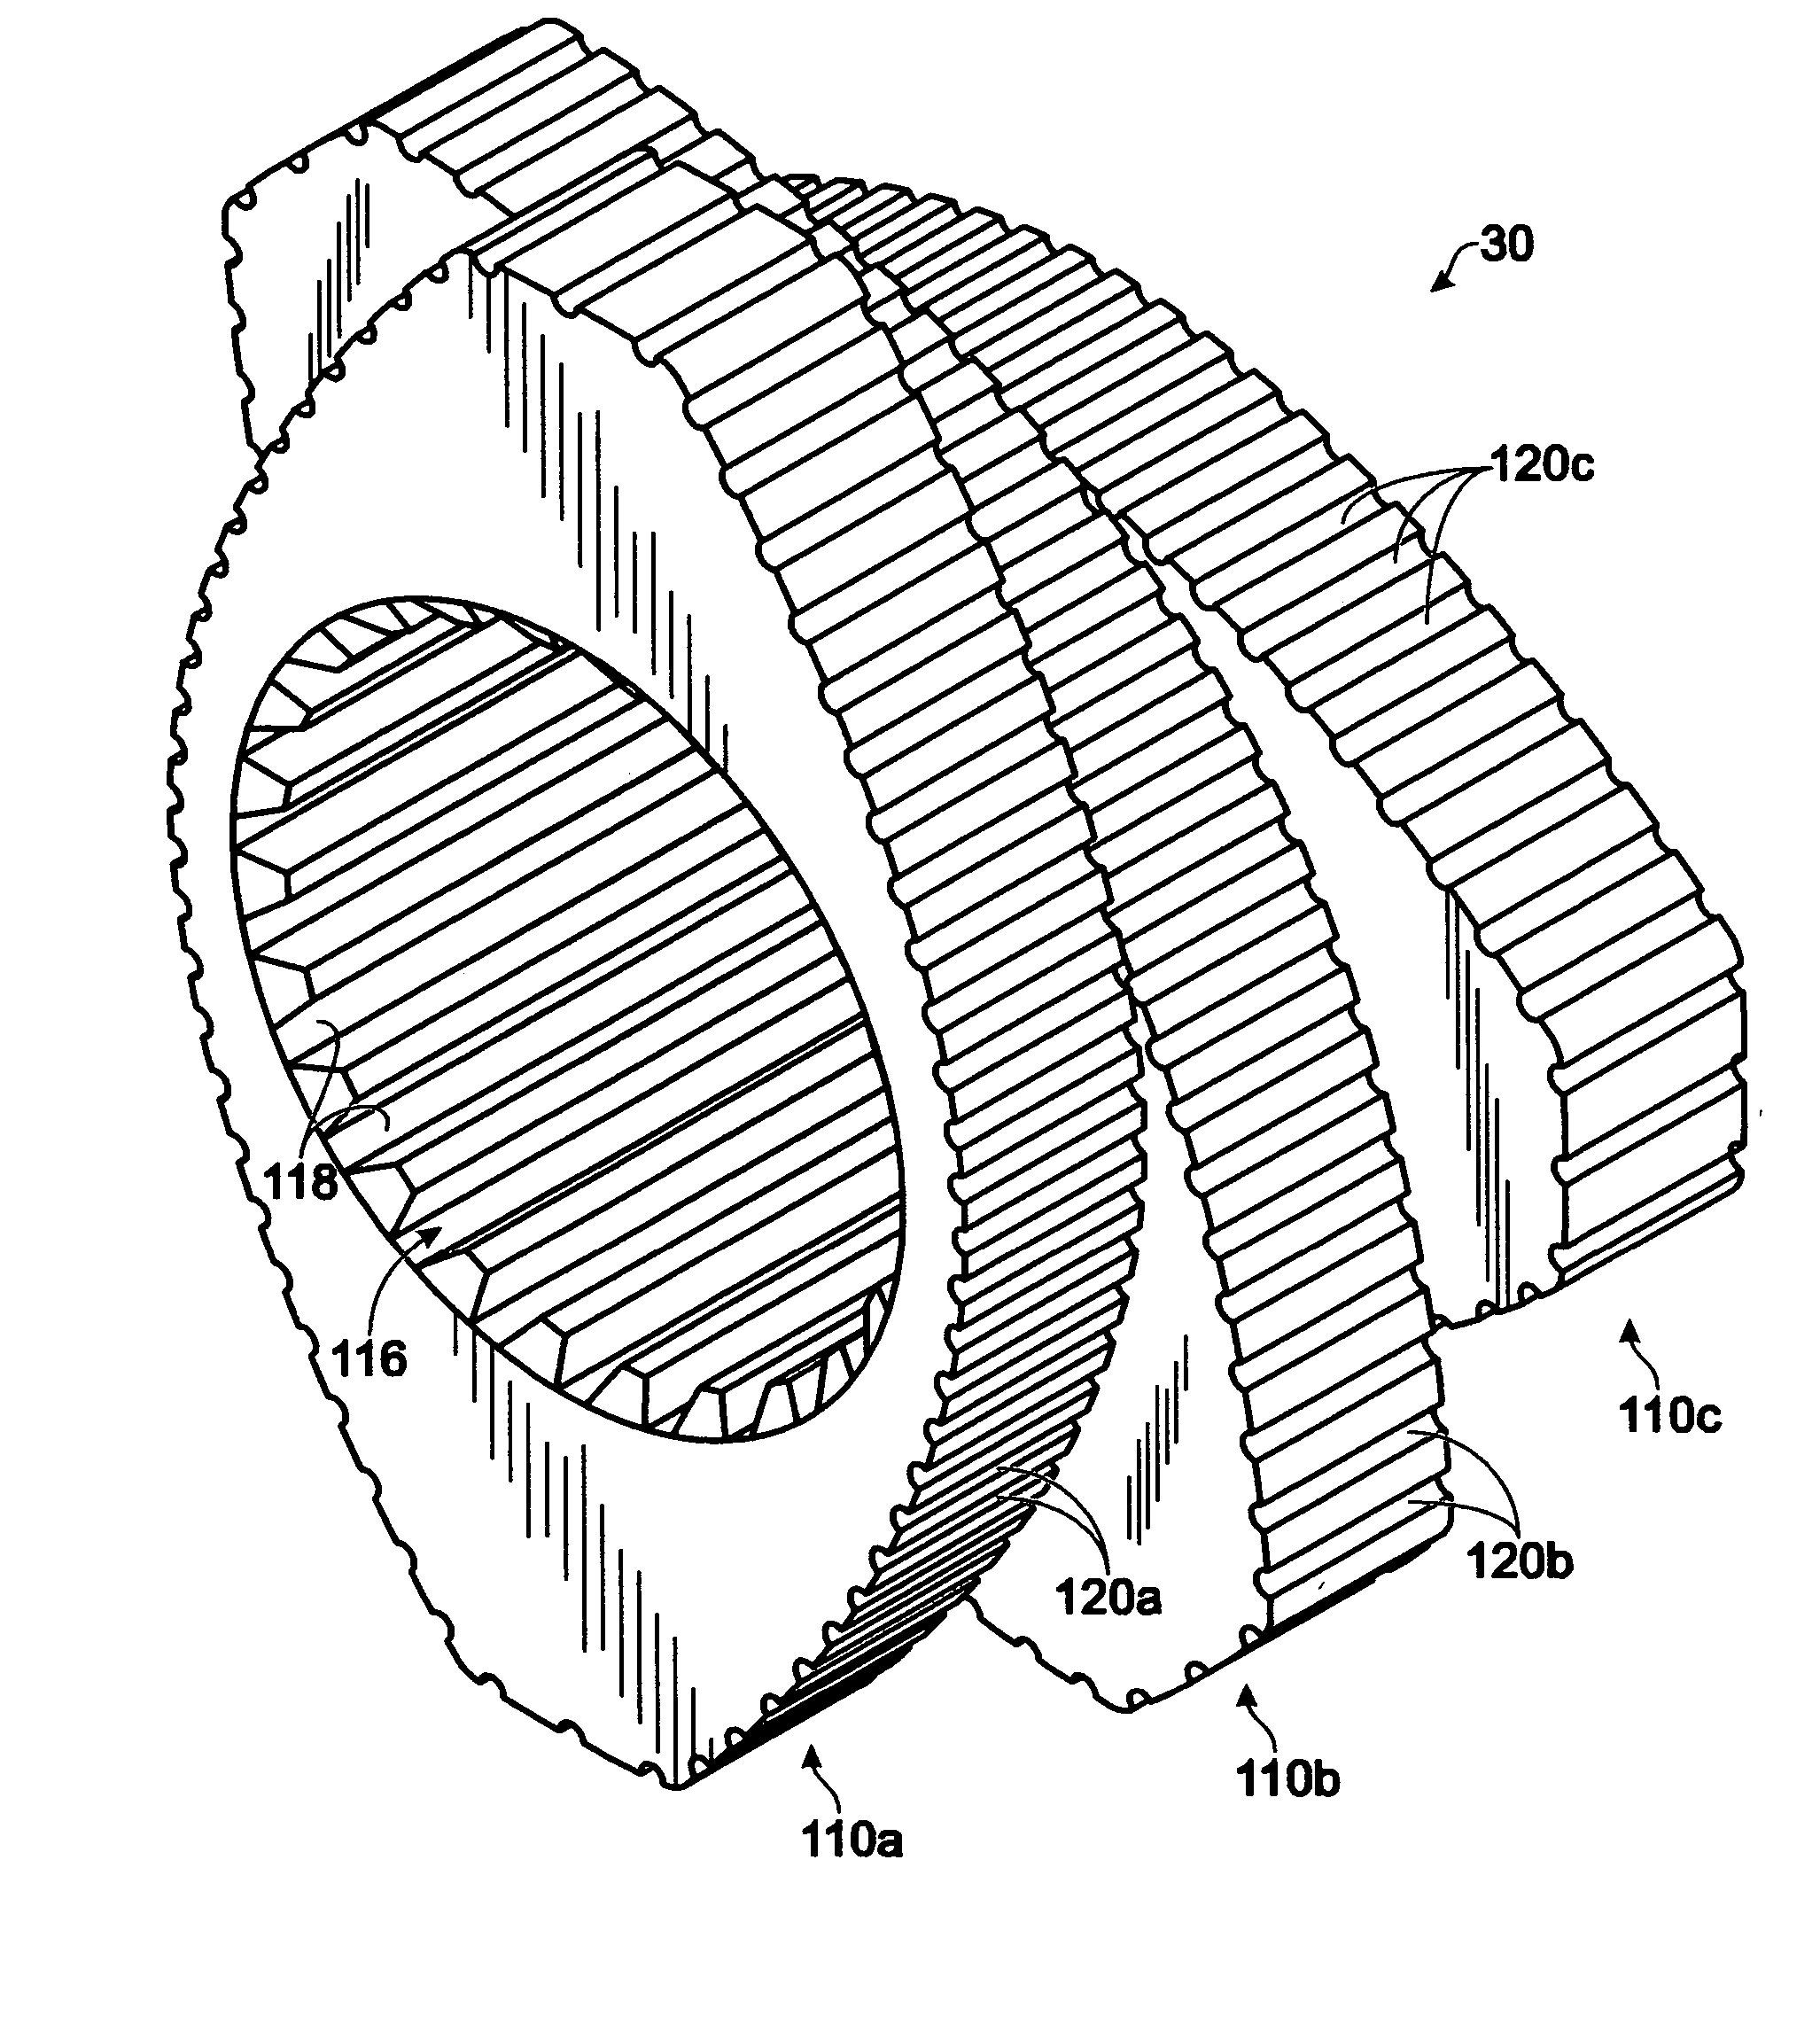 Serrated kneading disk and kneading block